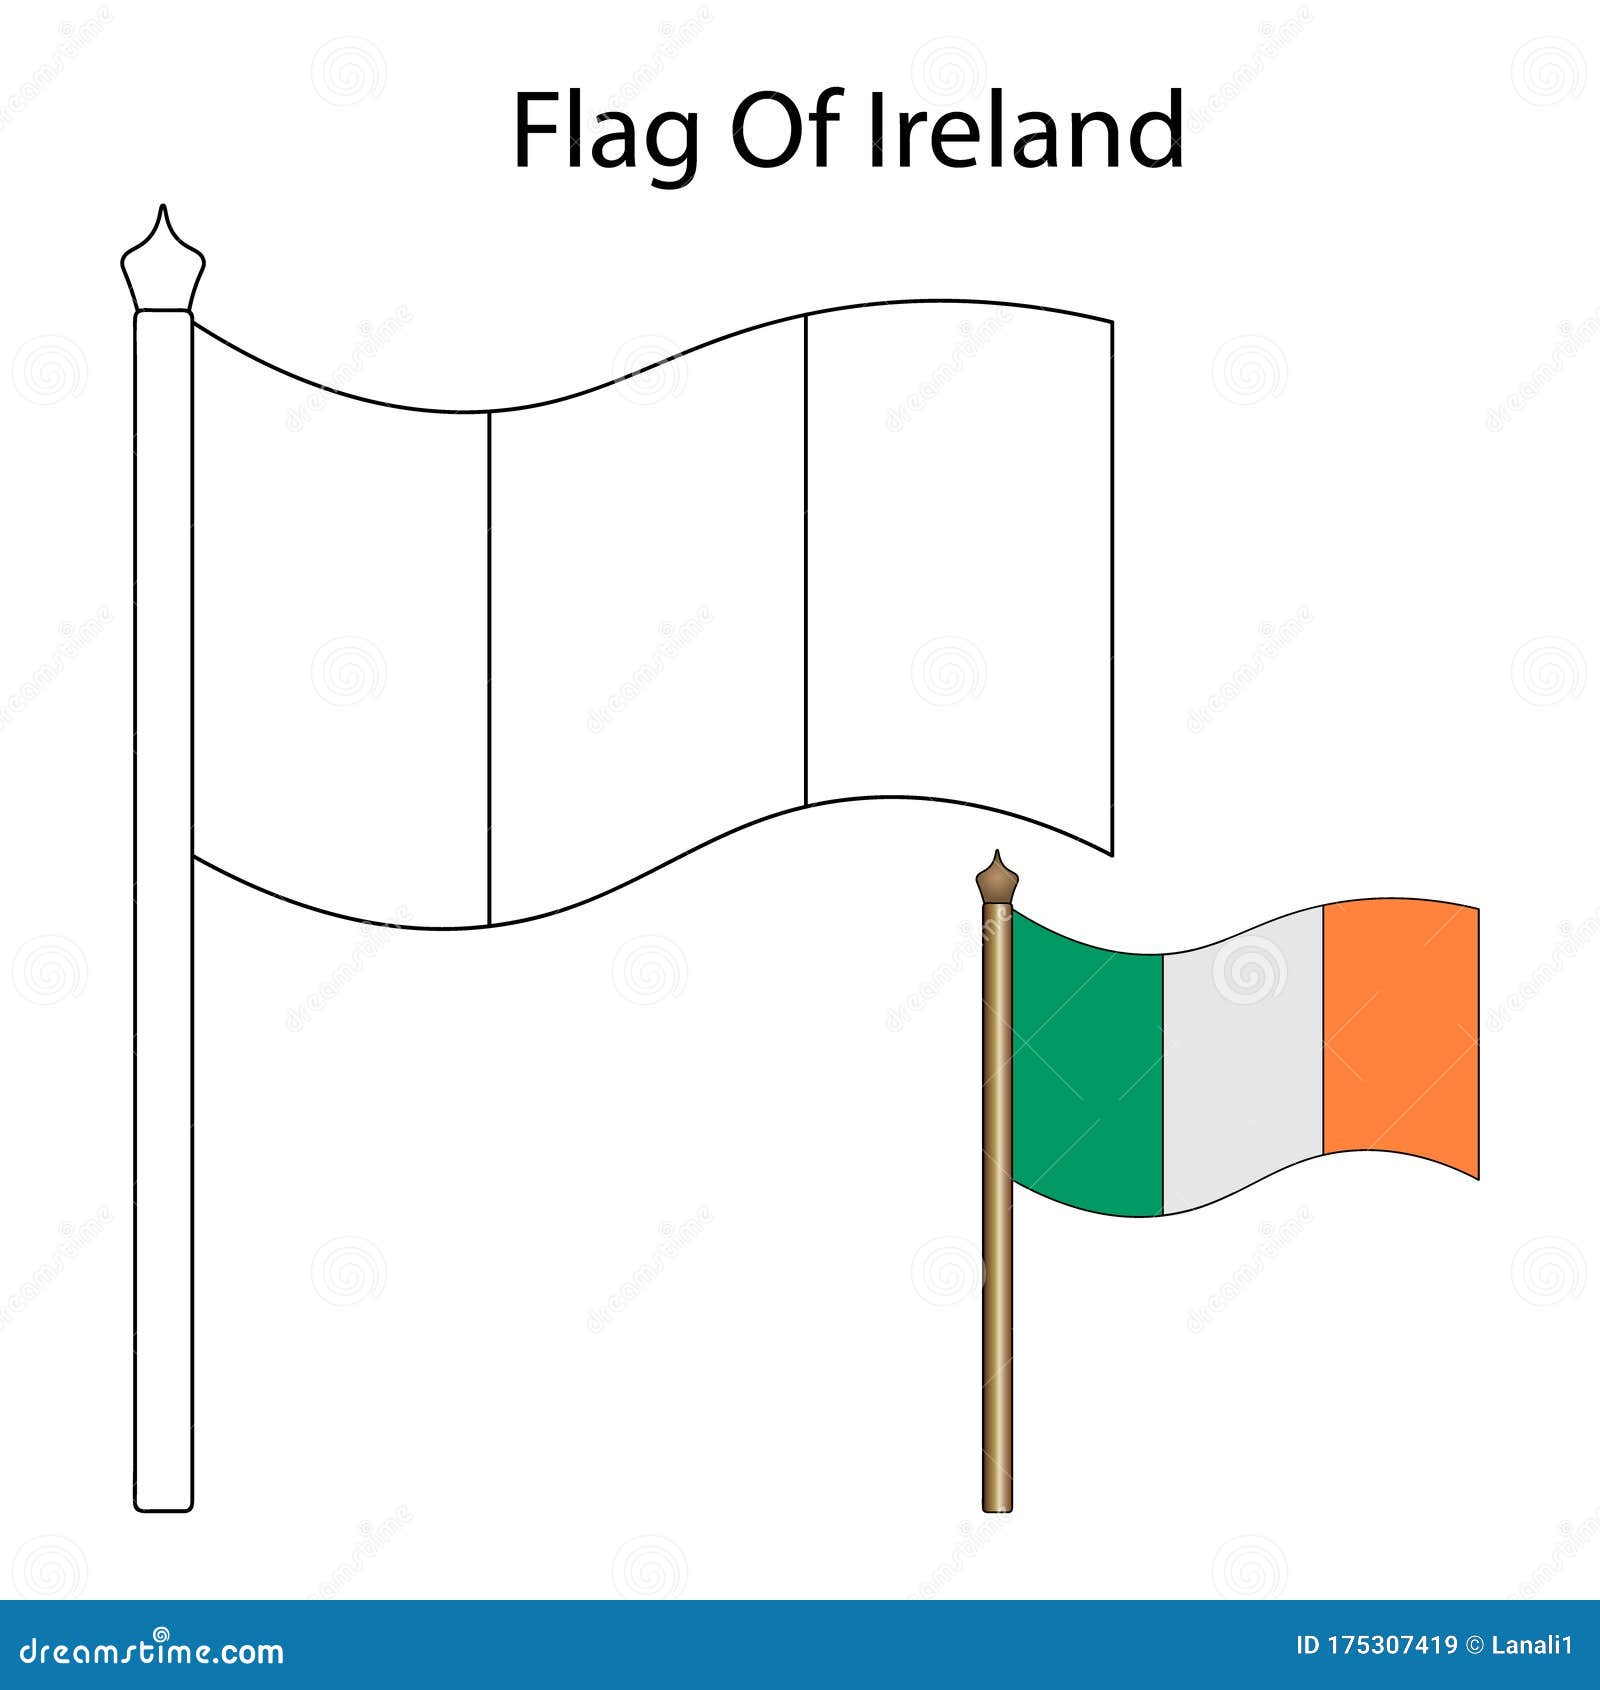 Download Vector Illustration Of The National Flag Of Ireland. Coloring Book For Children And Adults ...